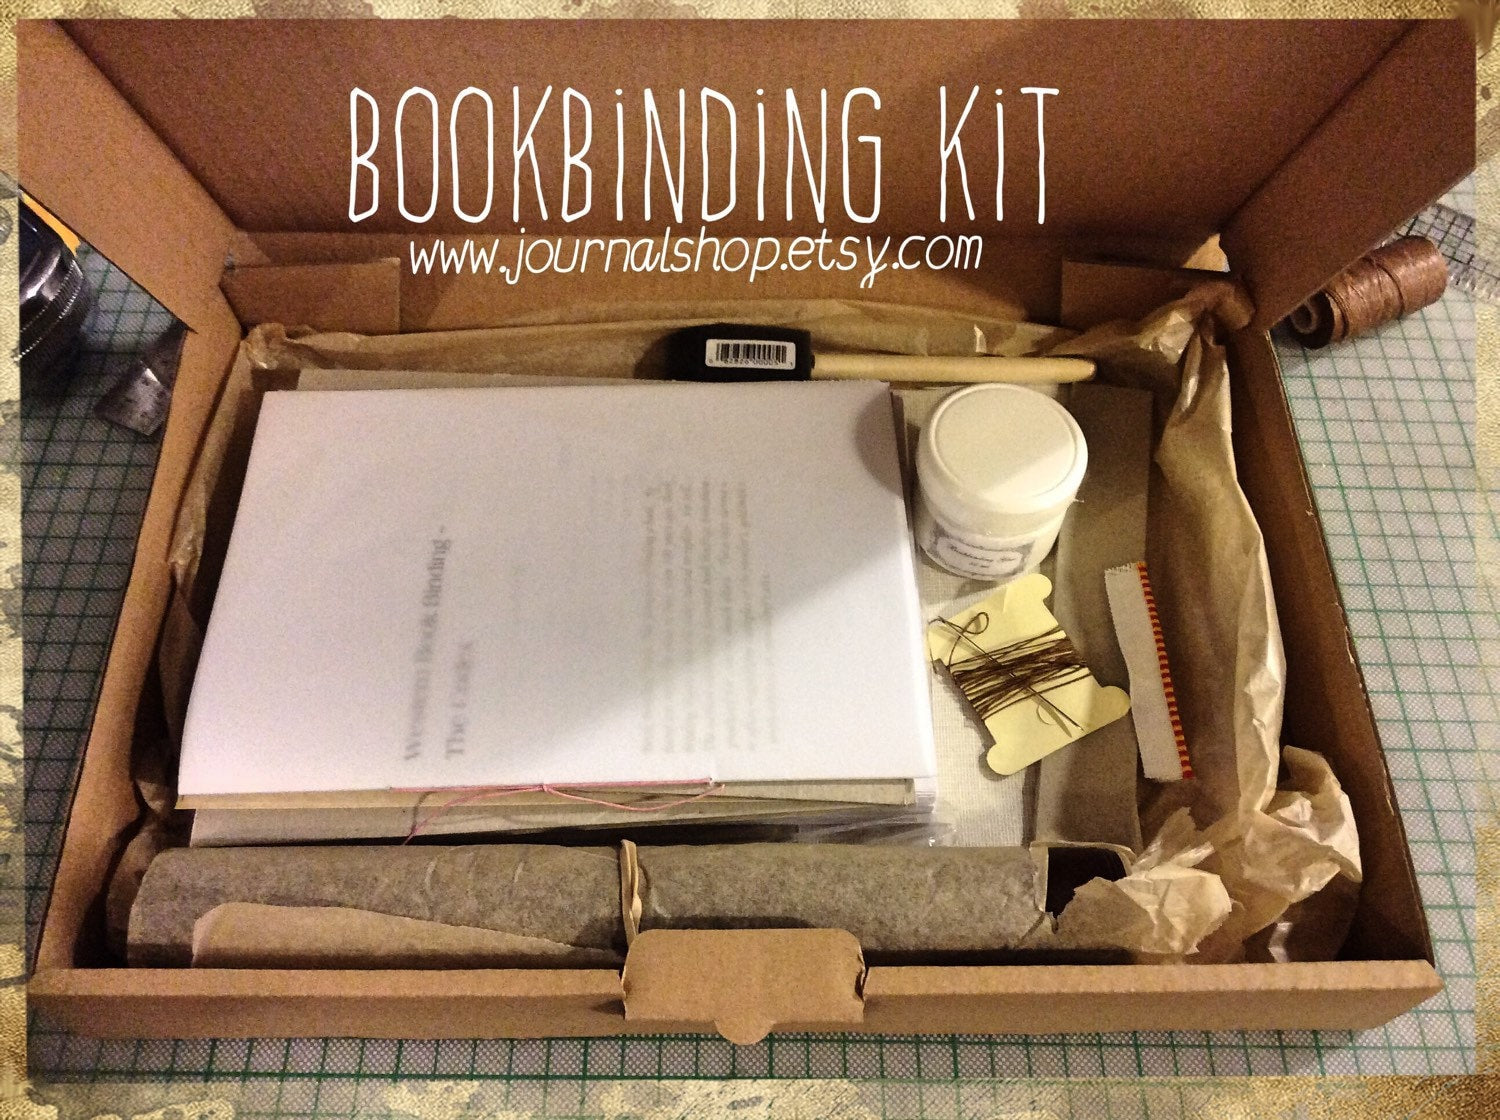 The Book Box - The Ultimate Industrial Bookbinding Kit